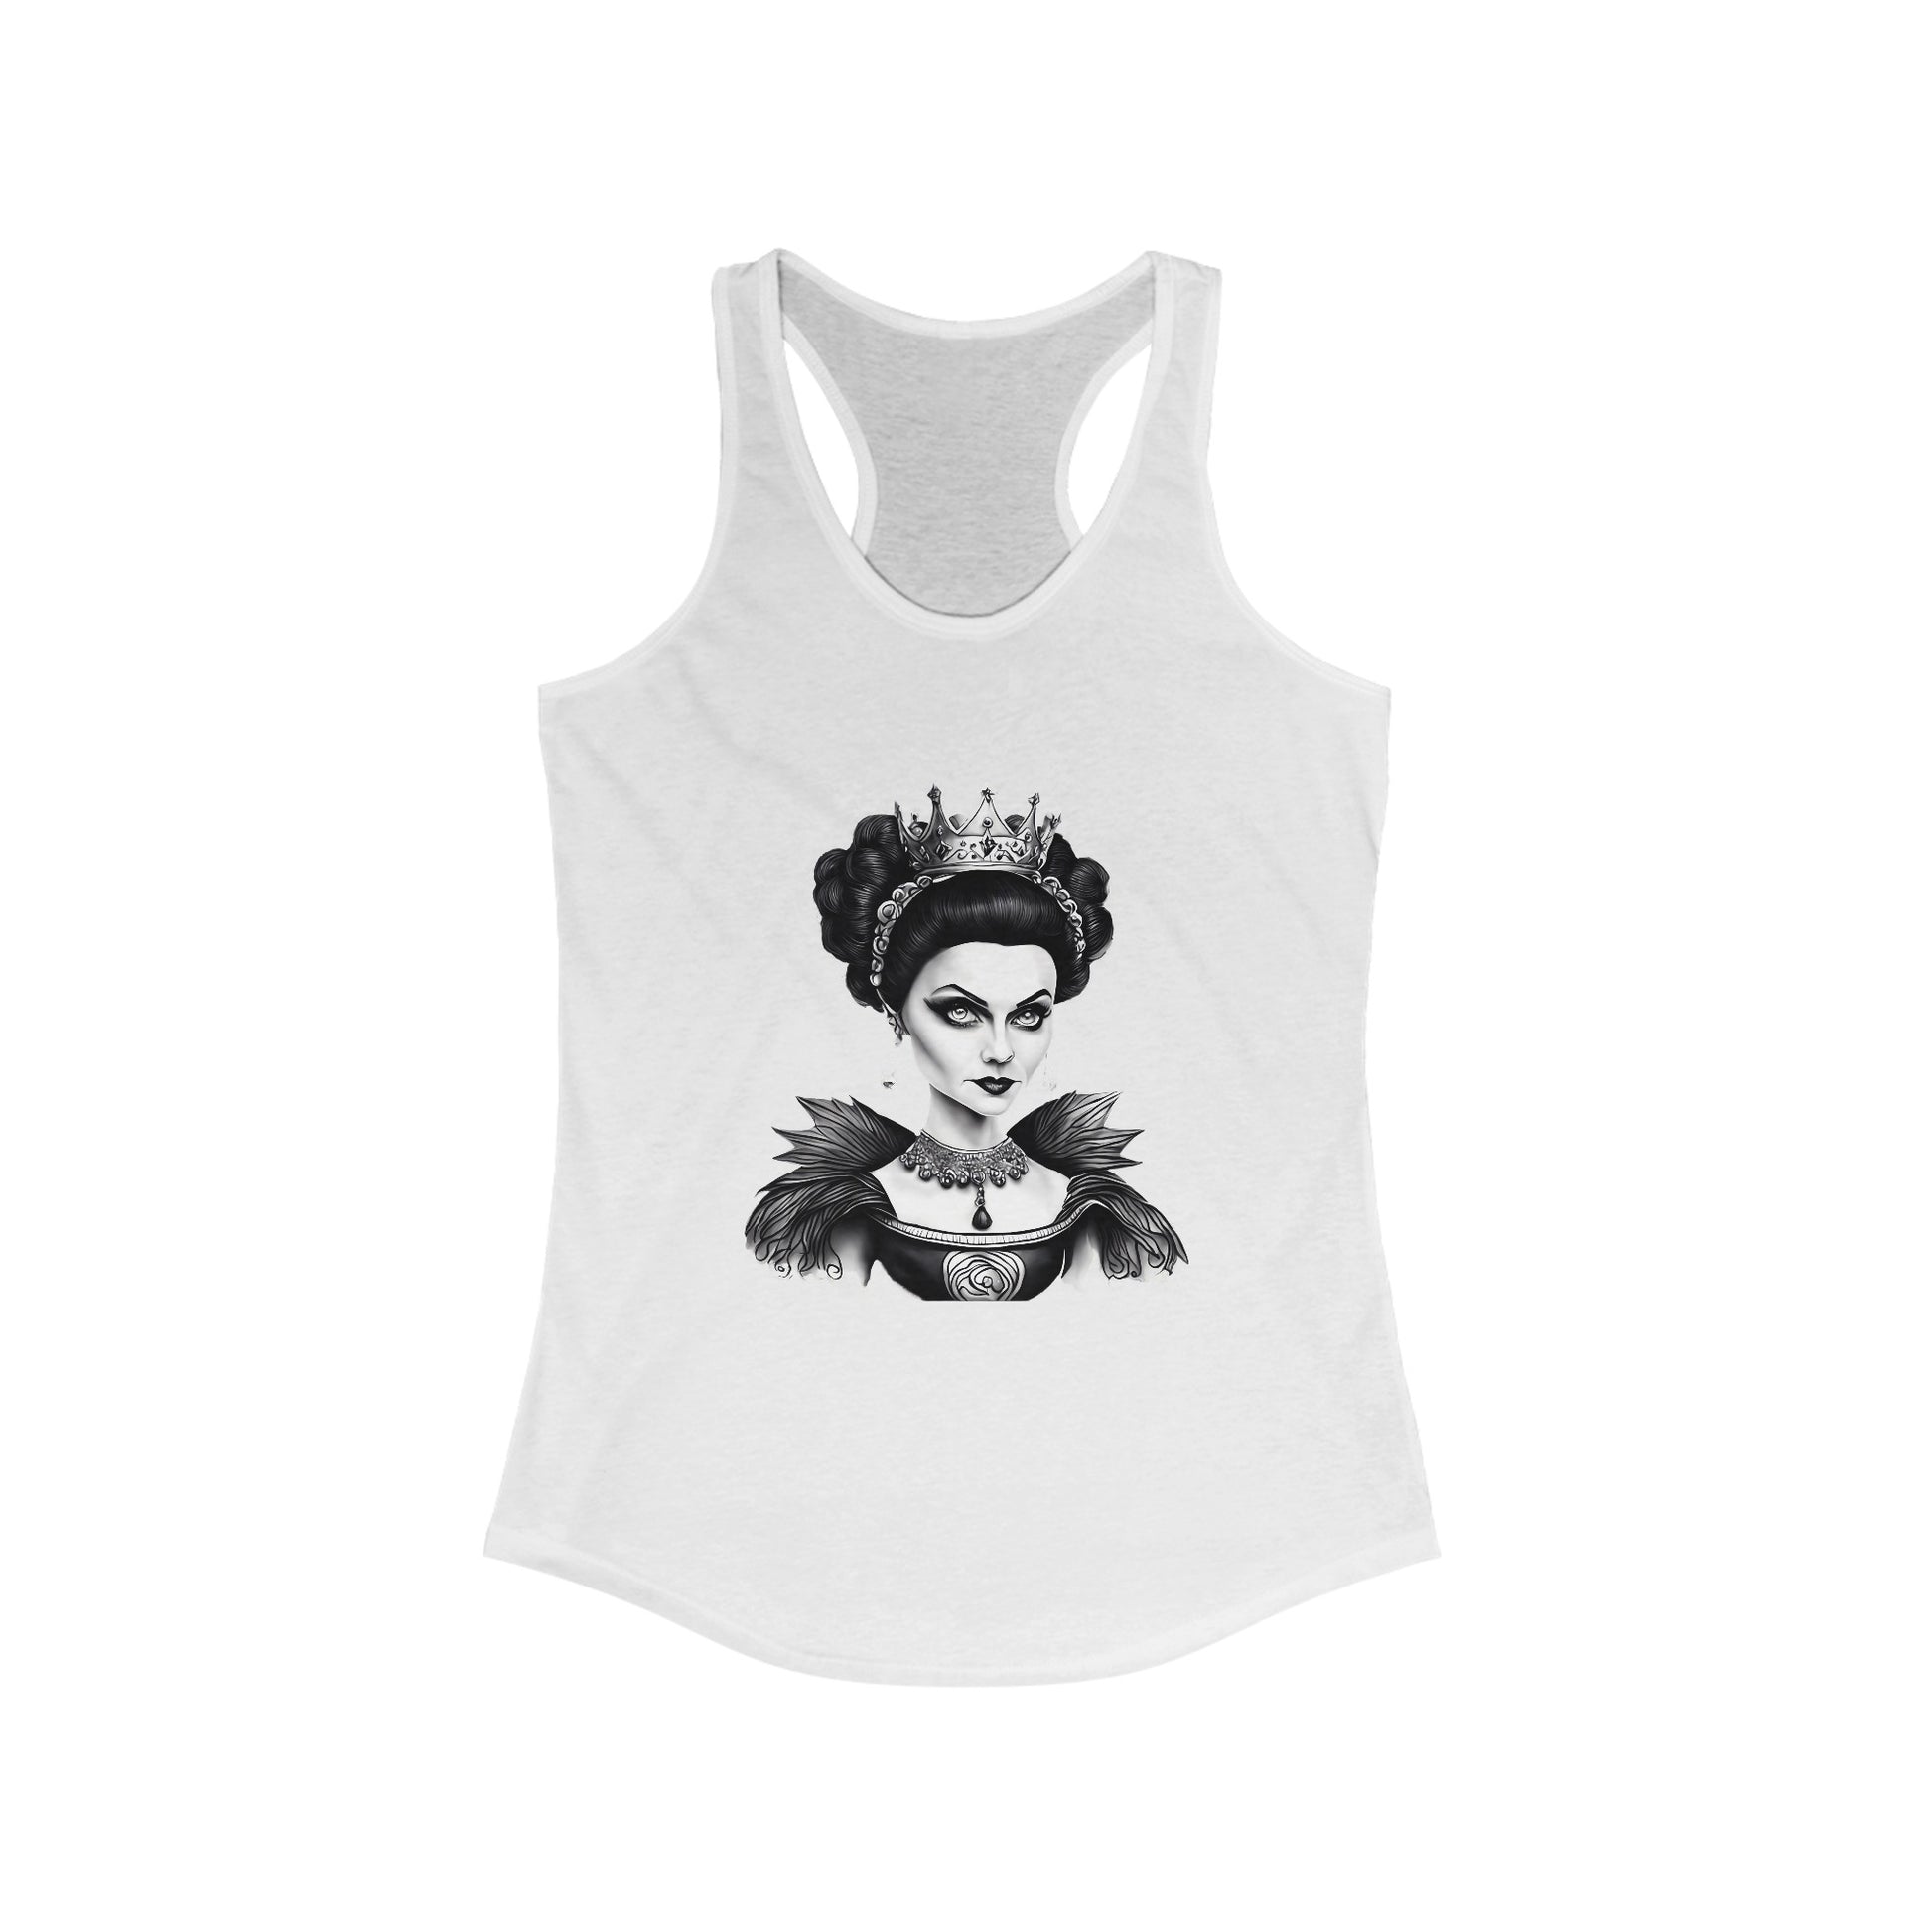 The Stamina for Men Women's Queen of Spades Swingers white Tank Top | QOS front view